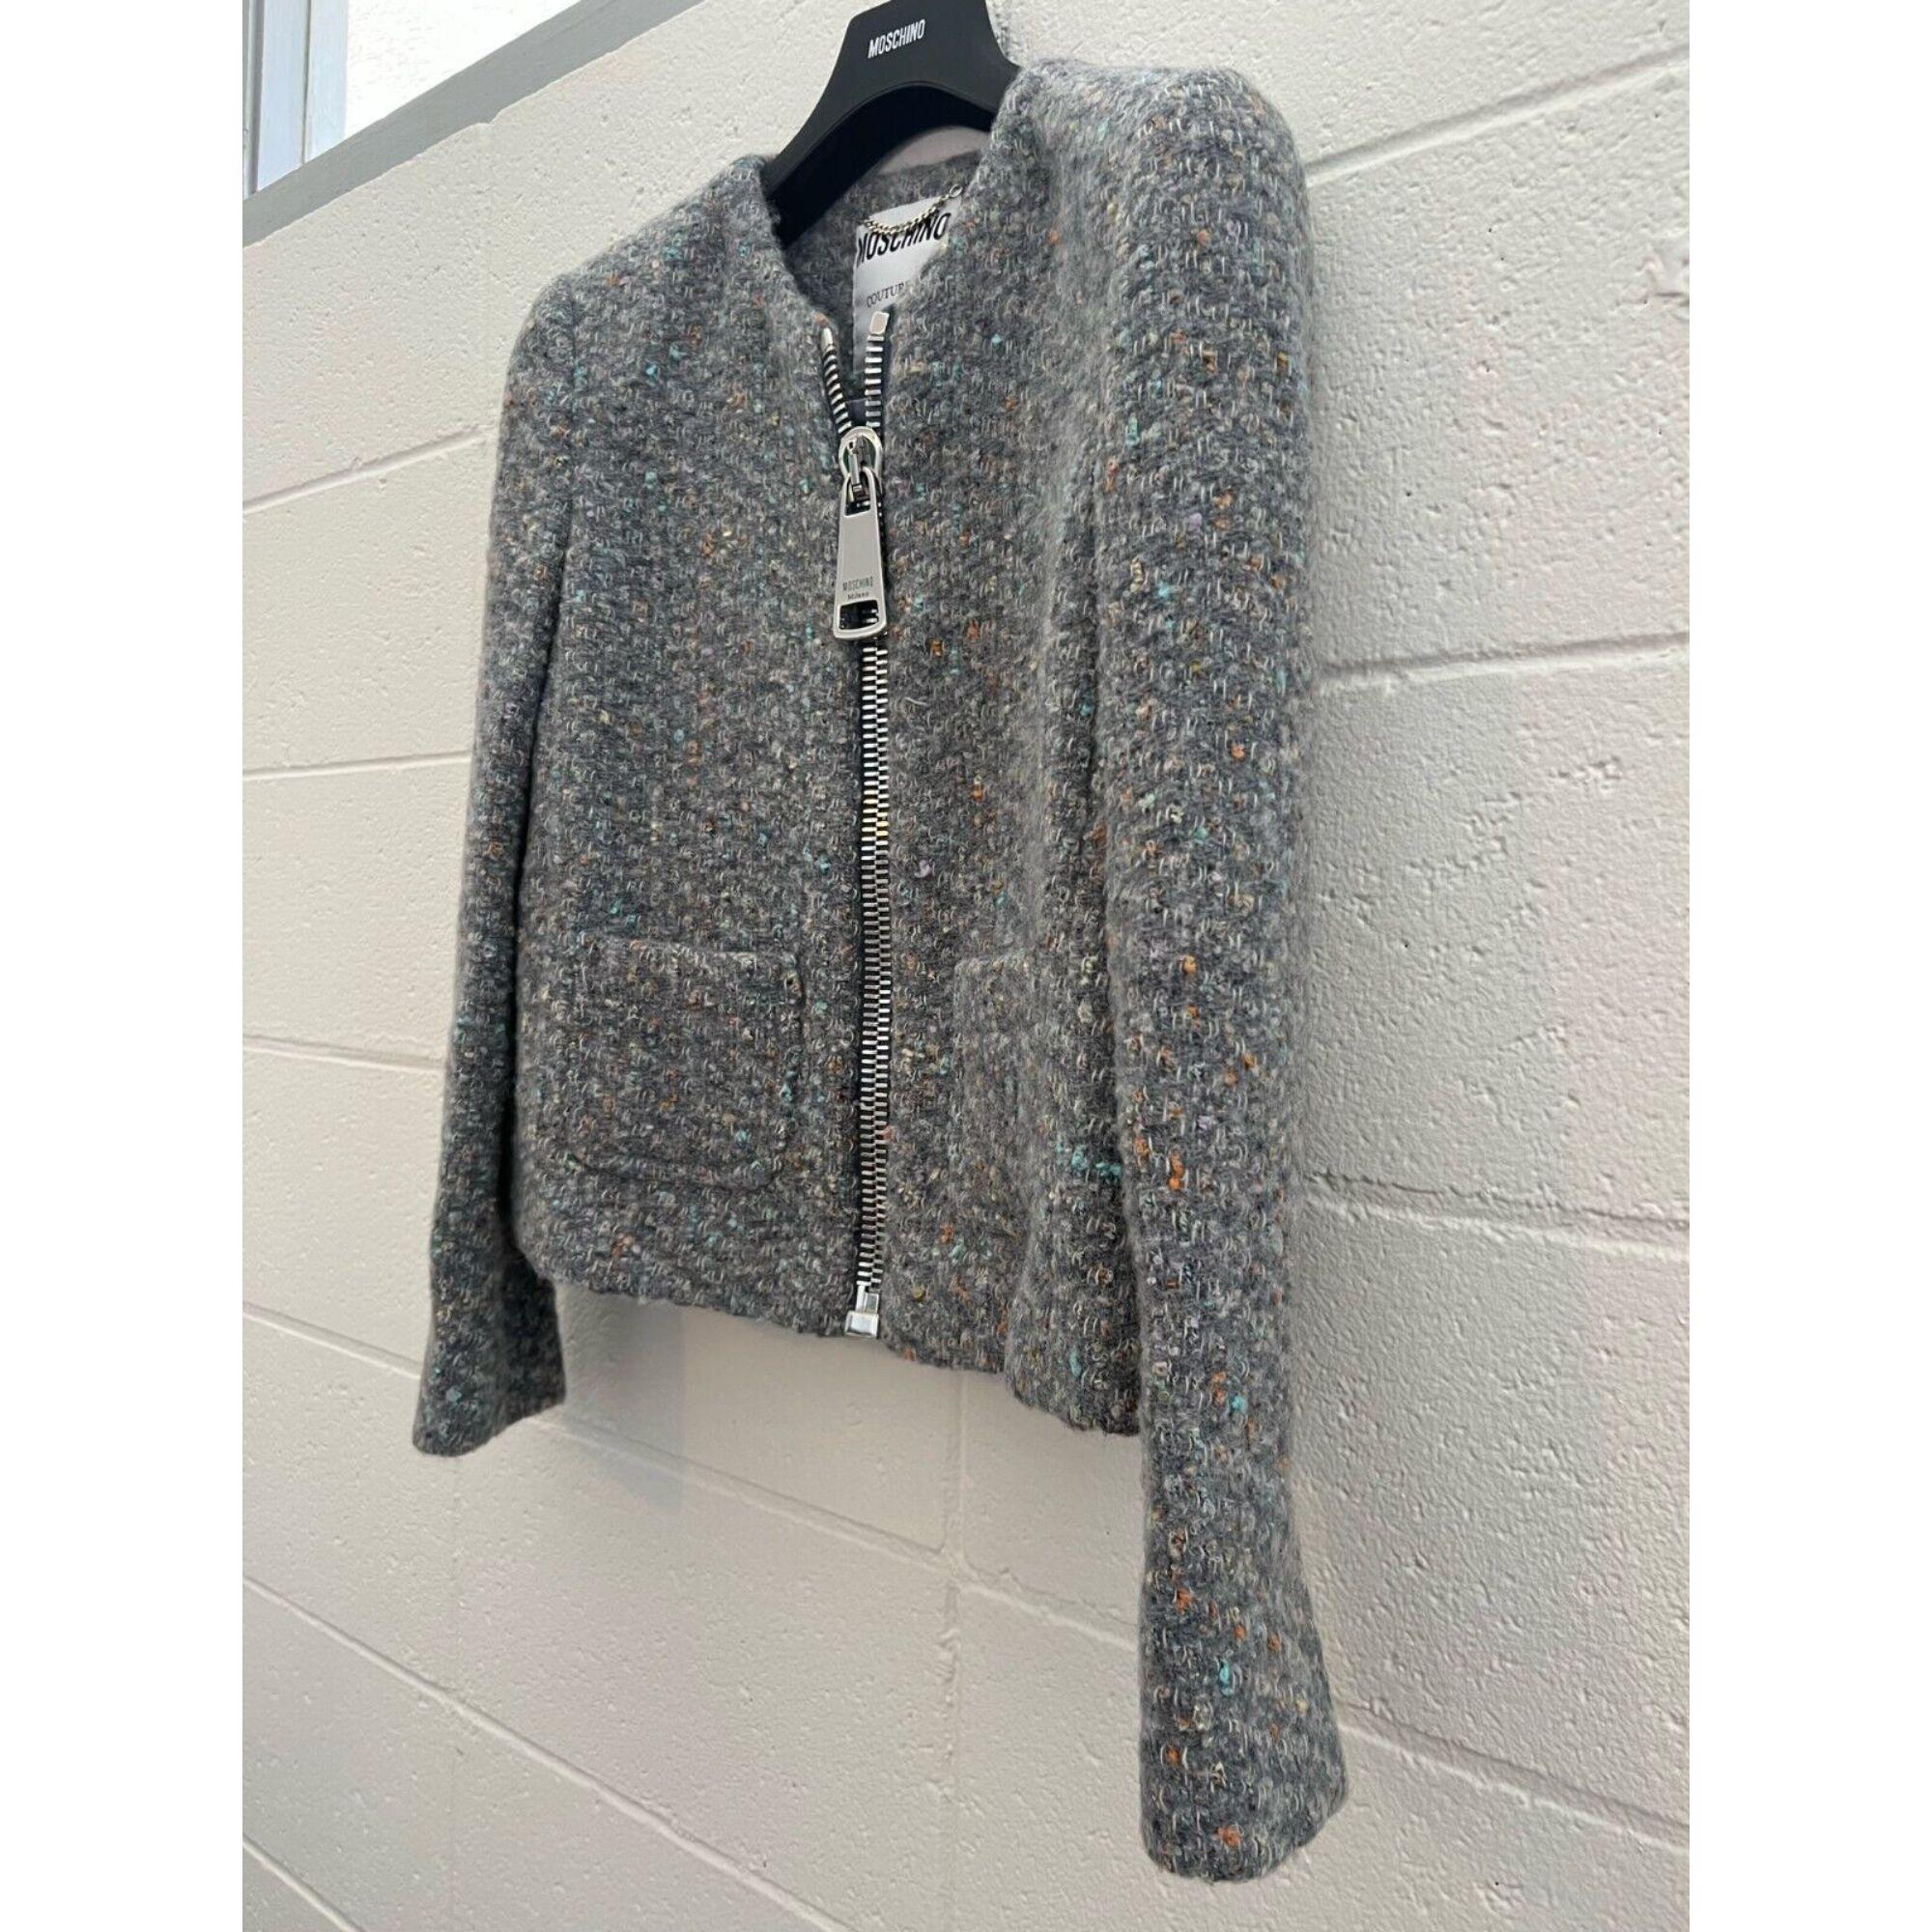 AW20 Moschino Couture Boucle Wool Jacket by Jeremy Scott, Size US 8 For Sale 6